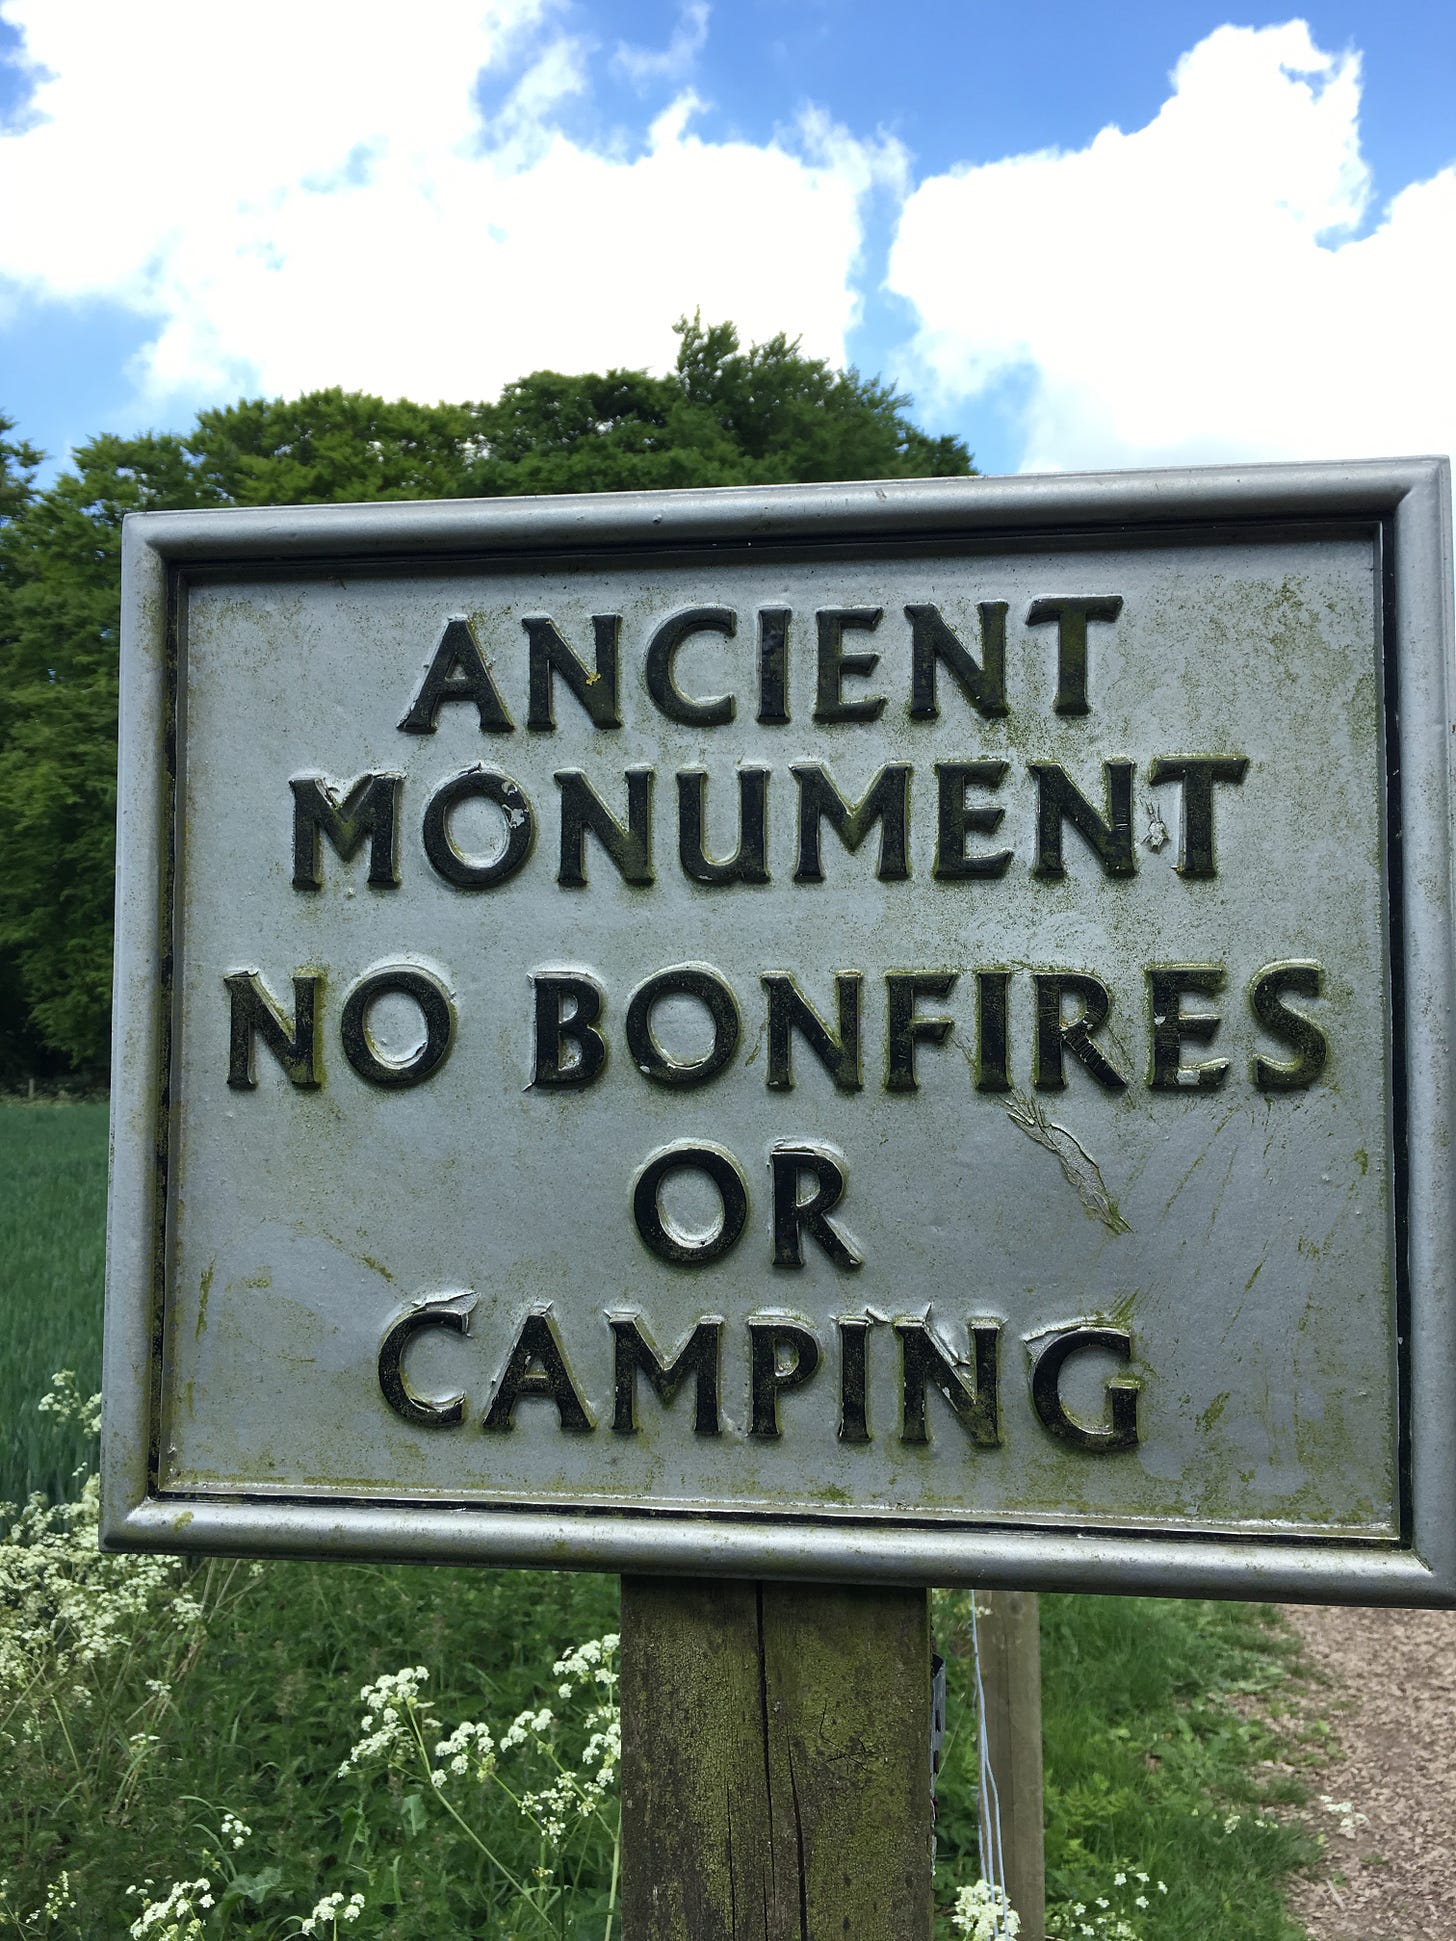 a sign the reads "ANCIENT MONUMENT NO BONFIRES OR CAMPING," with flowers and trees nearby.